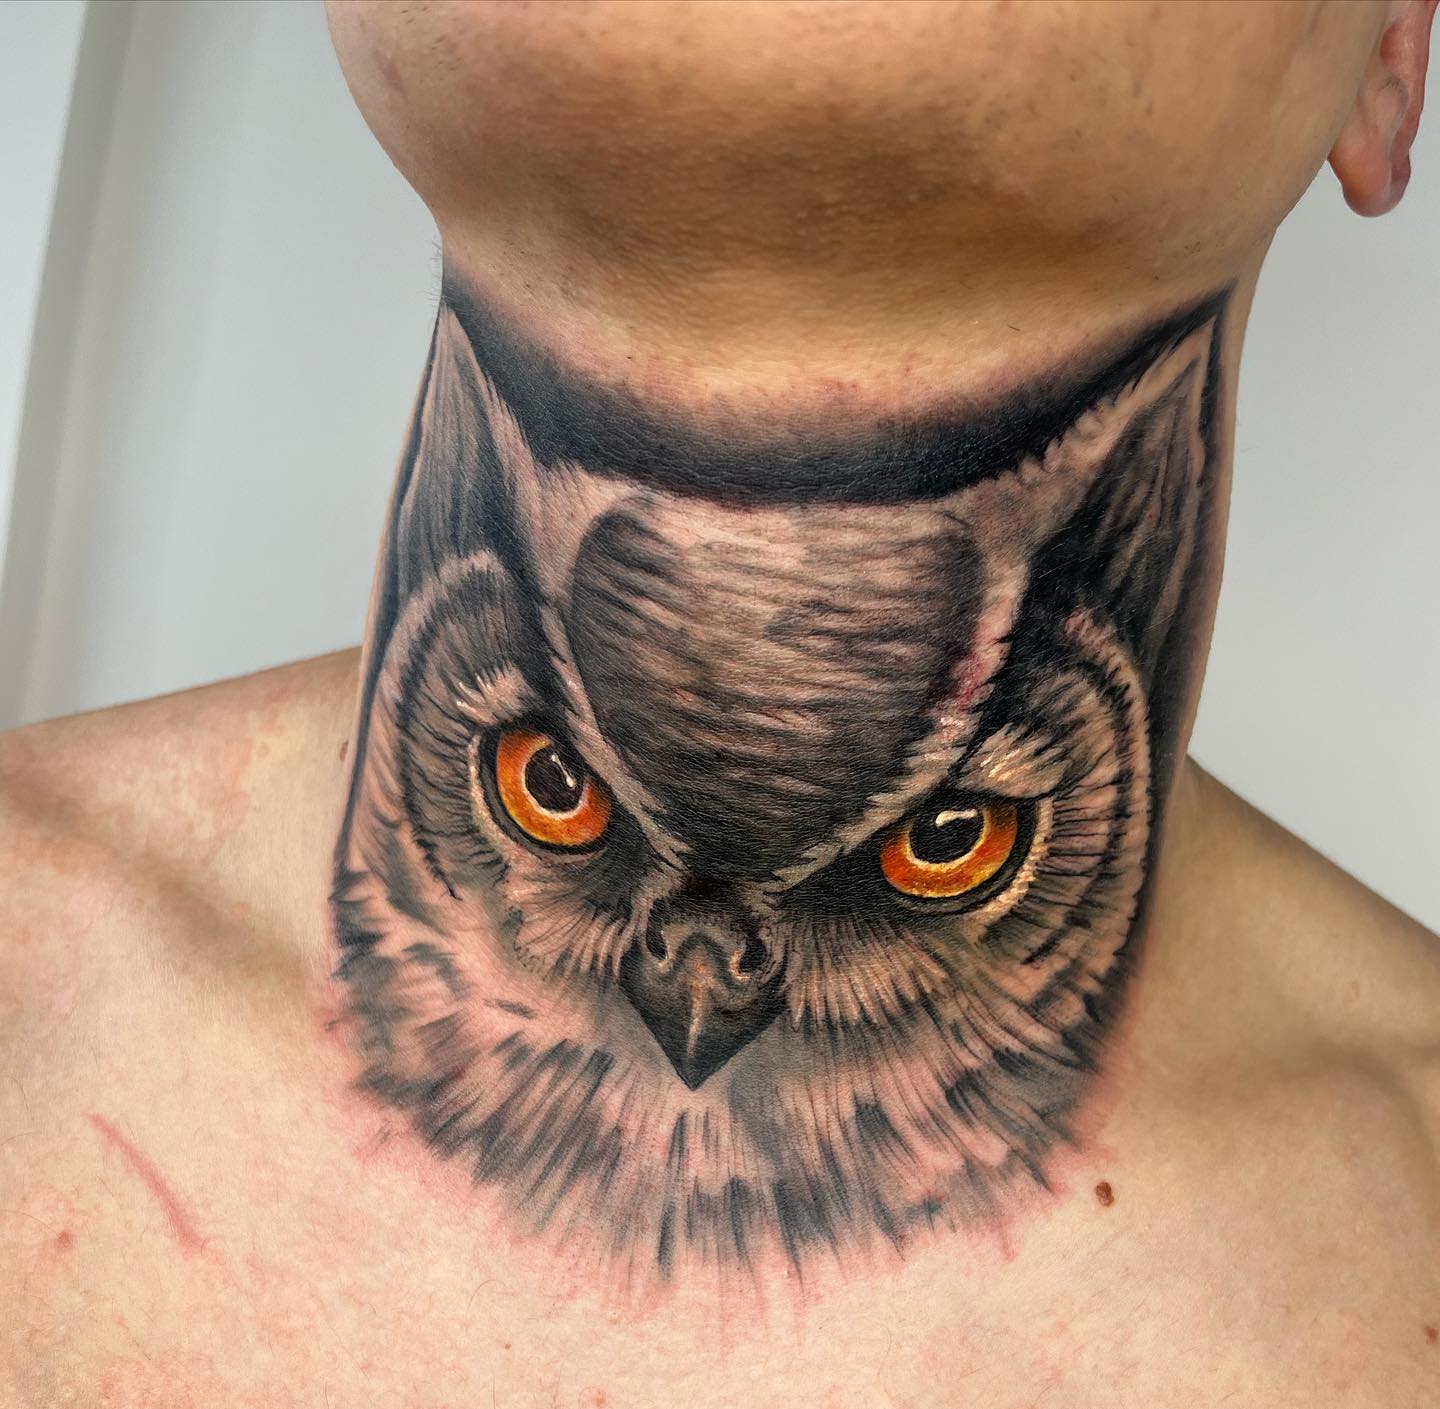 binx medel recommends owl throat tattoo pic